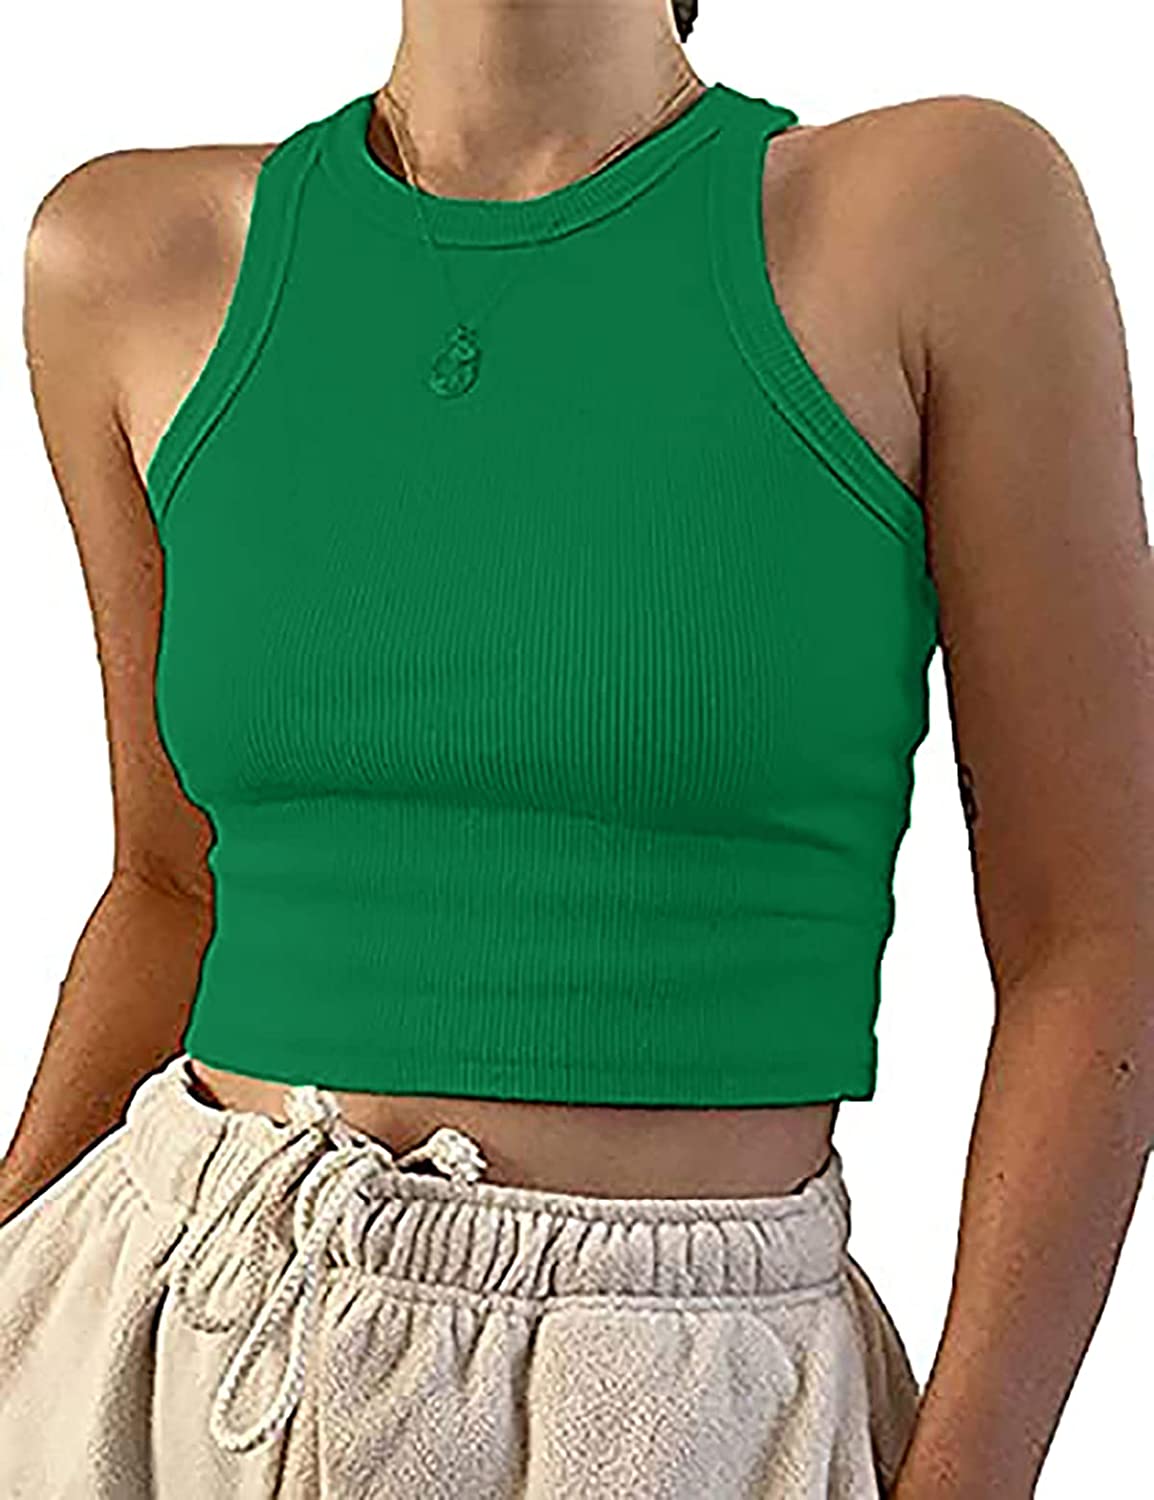 JESSIVO Womens Cropped Tank Tops Basic Solid Sleeveless Crop Top